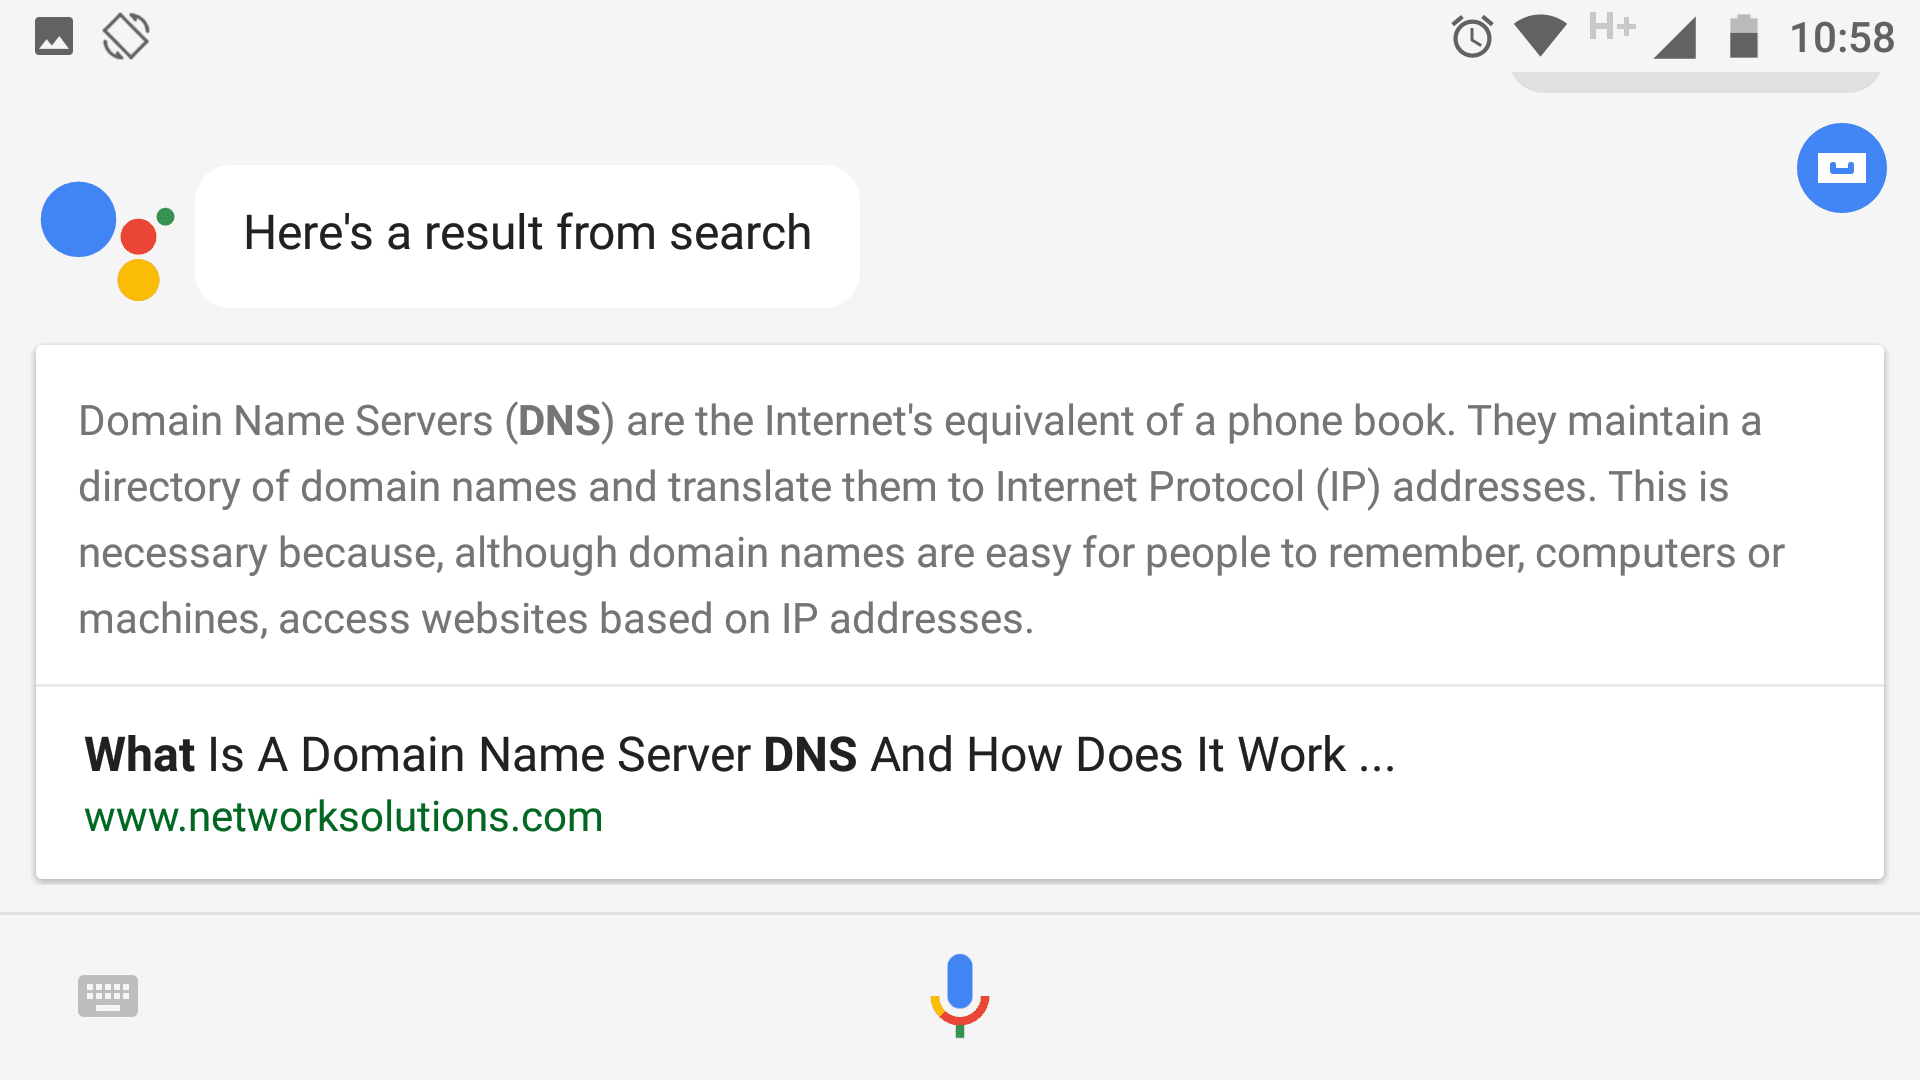 An instant answer for a search about what DNSs are,